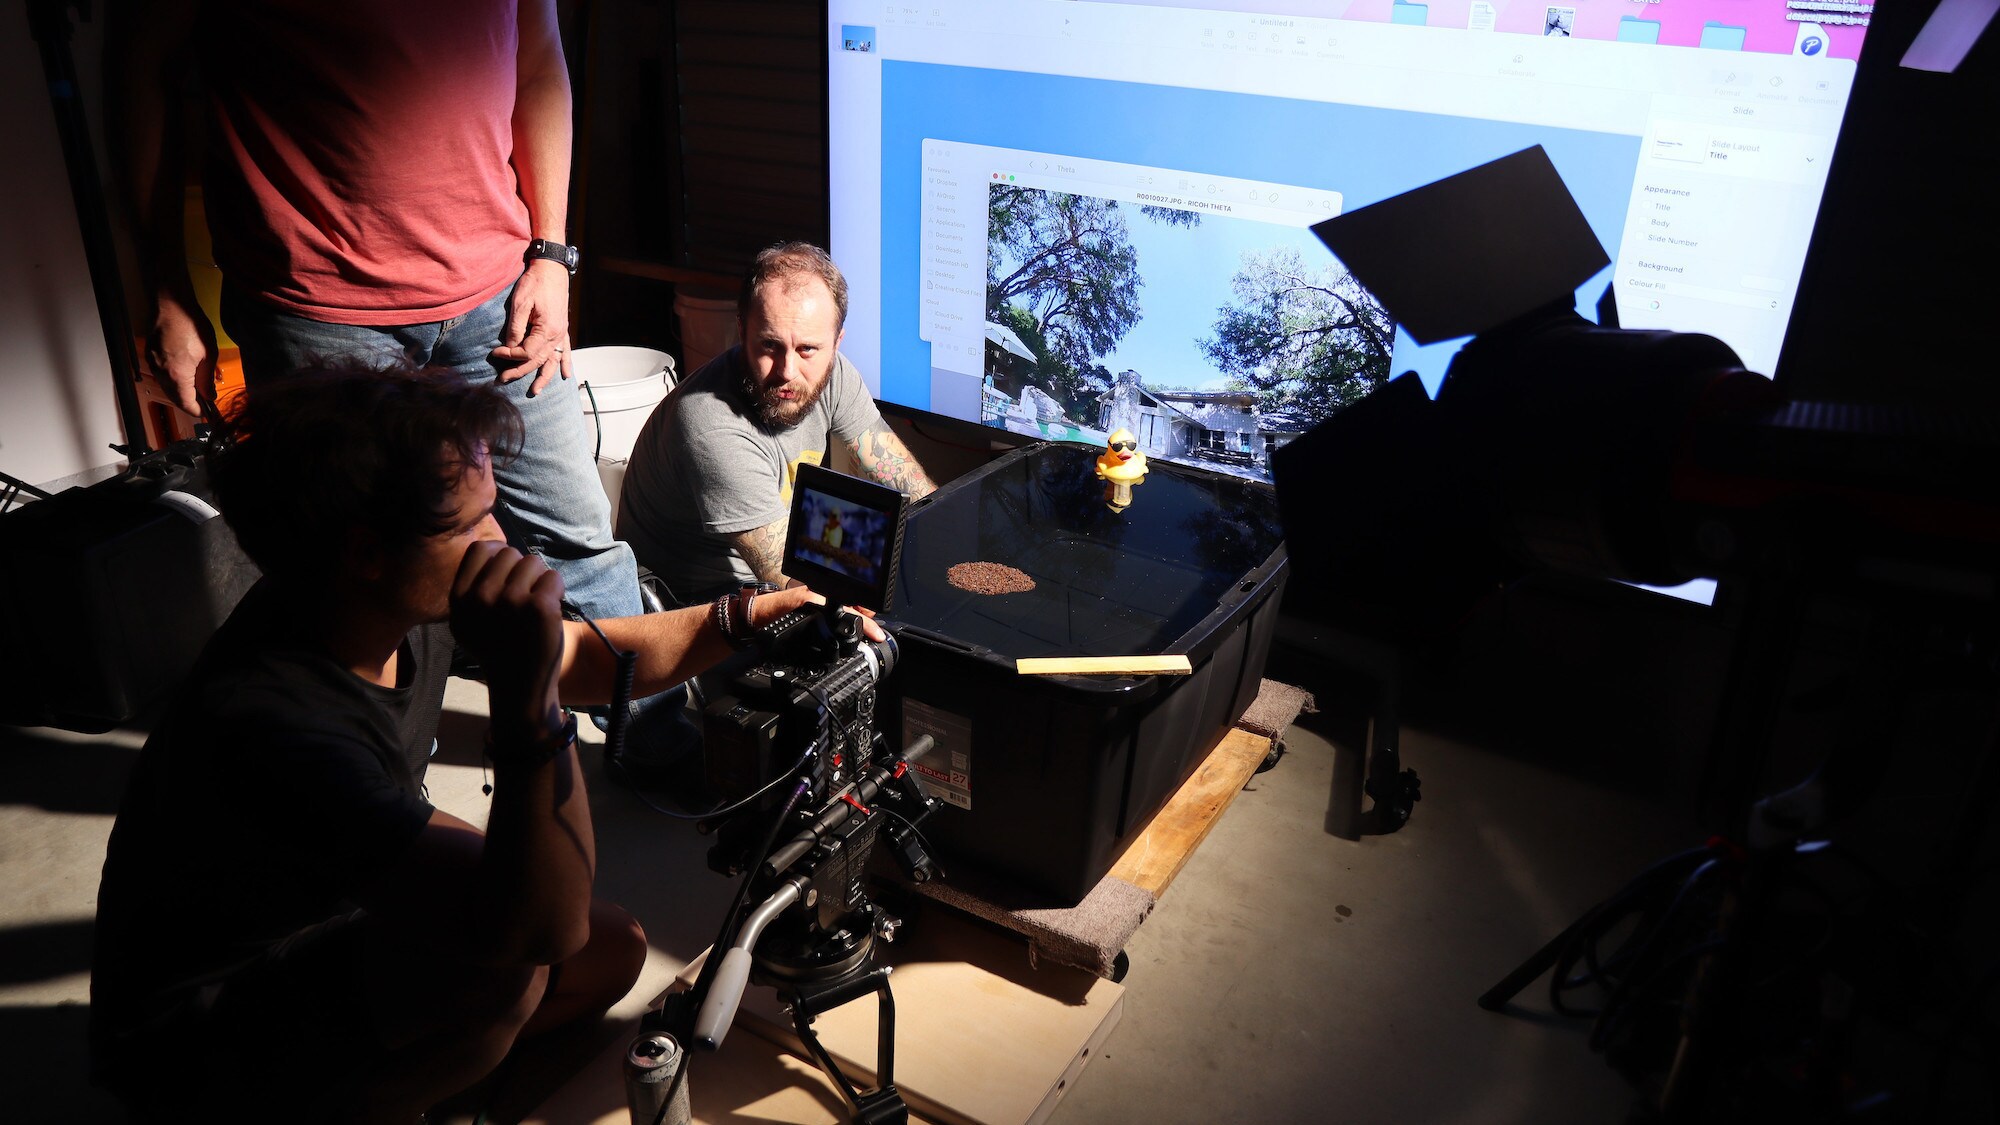 Director of Photography Alex Jones, lighting assistant Matt Langbehn and bug wrangler Sean O'Donnell set a shot of fire ants rafting in a tank in Buda, Texas for the "Braving the Backyard" episode of "A Real Bug's Life."  A plastic duck is included to provide perspective (showing how small the fire ants are) and a terrace and house are seen in the background backplate. (National Geographic/Alex Hemmingway)